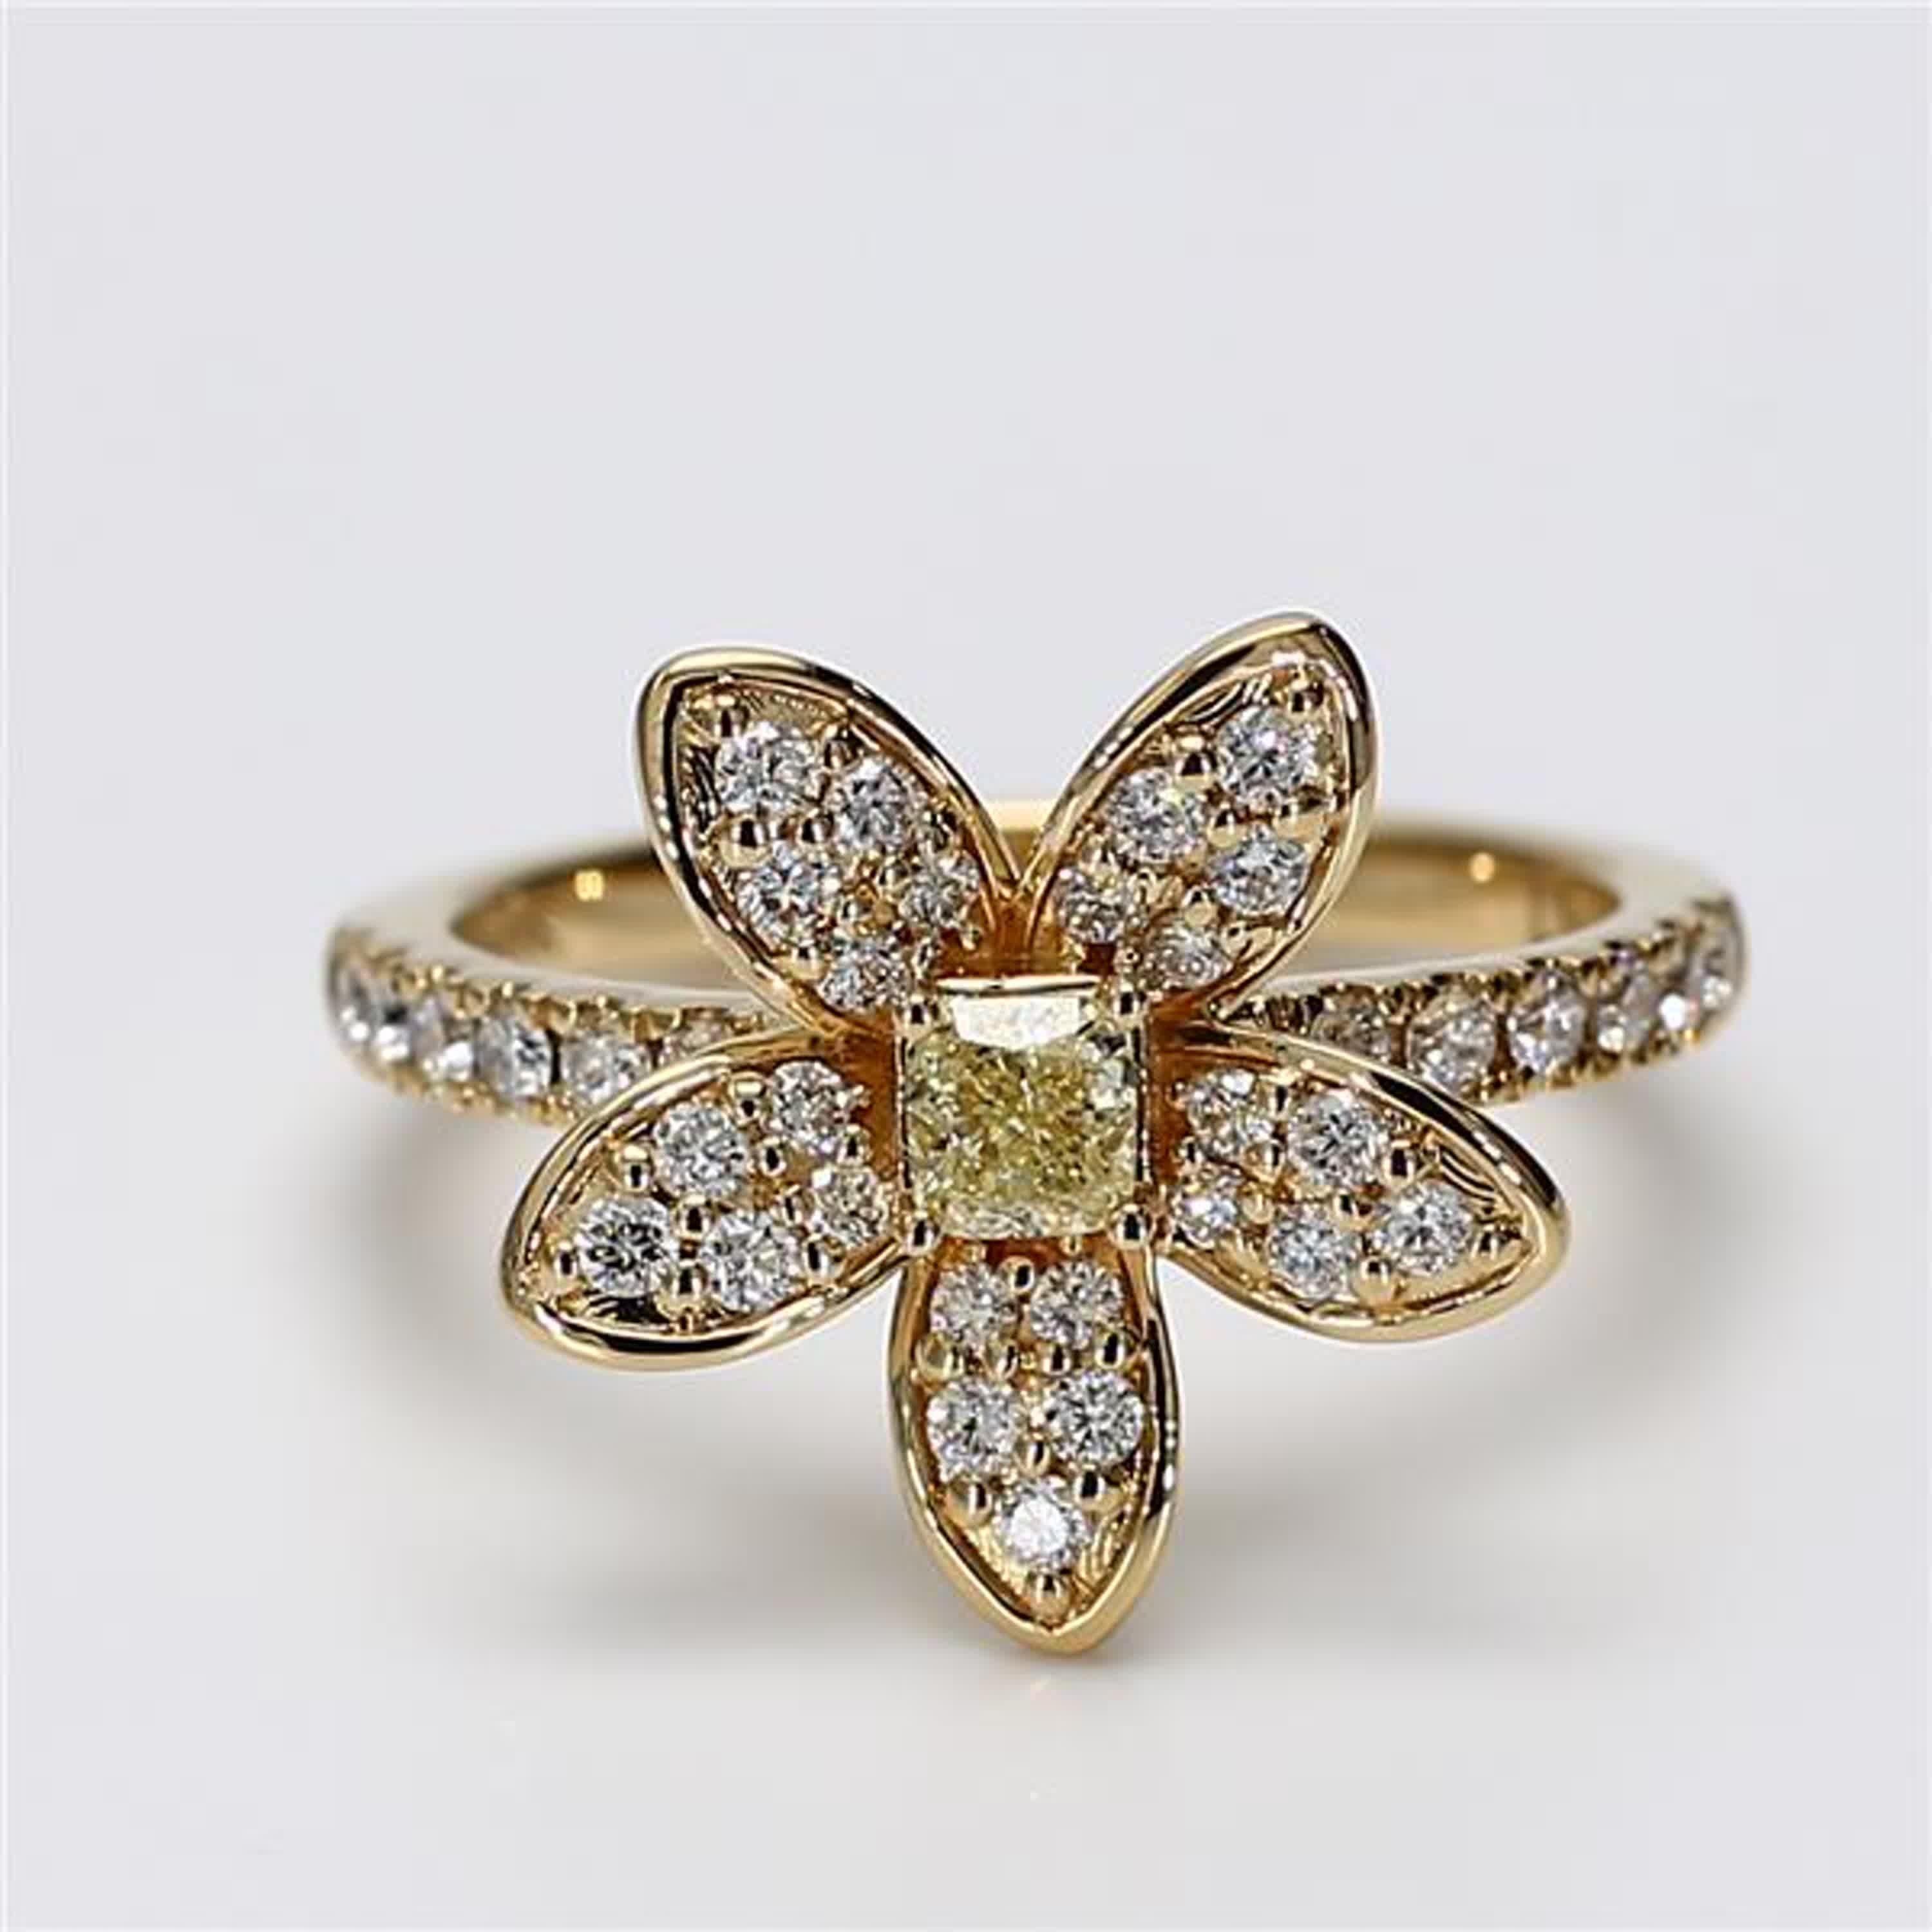 Natural Yellow Cushion and White Diamond .76 Carat TW Gold Cocktail Ring